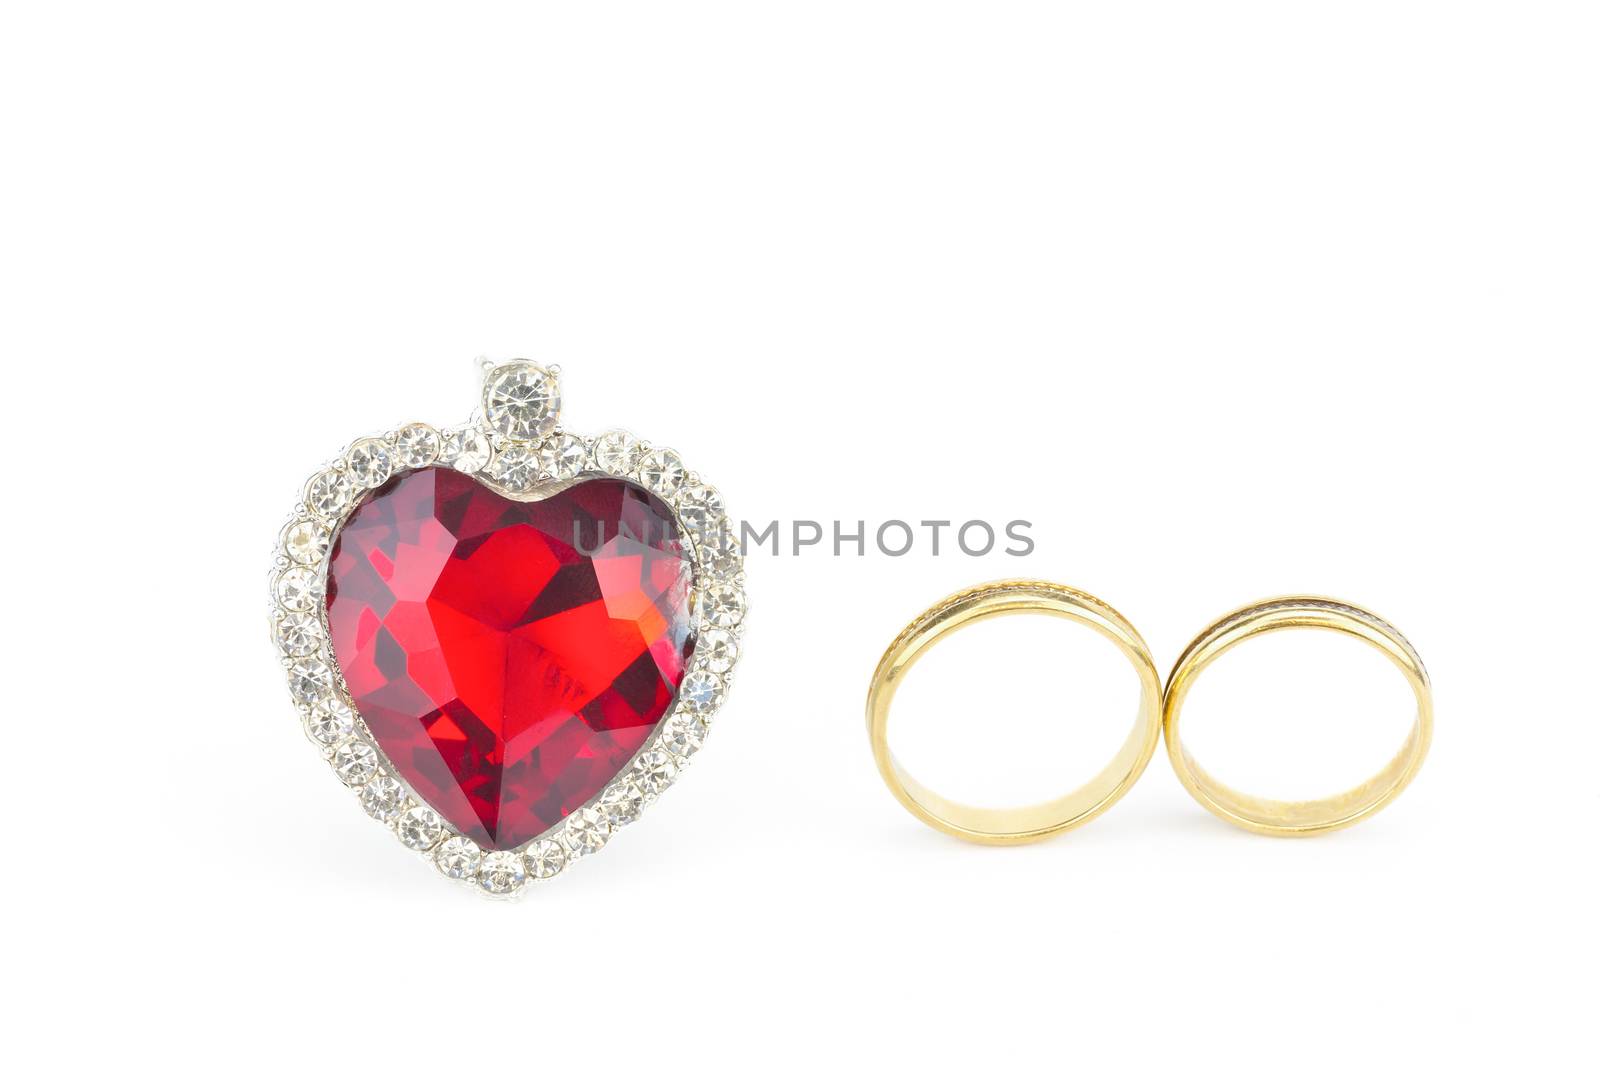 Red jewelry heart and two golden rings by BenSchonewille